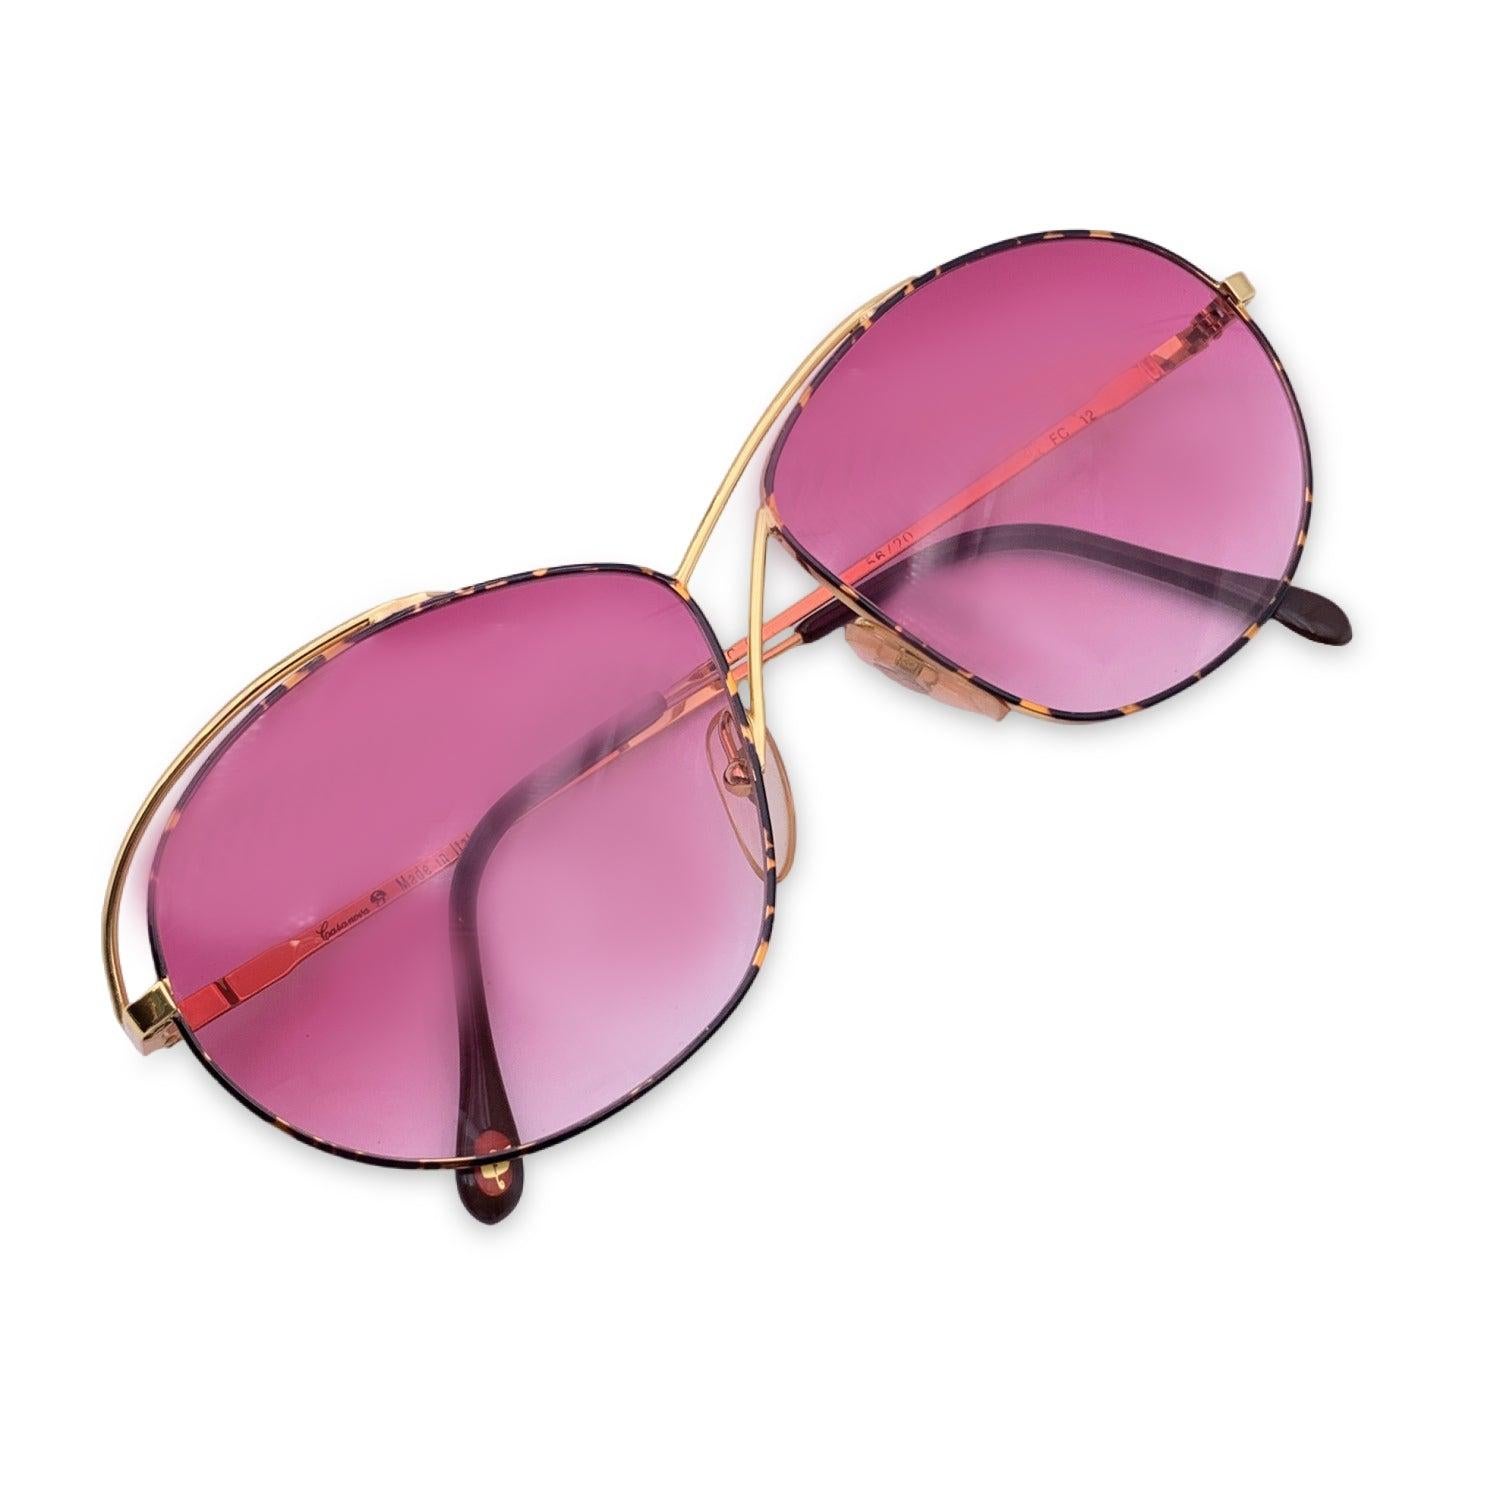 Vintage Casanova Women sunglasses. Model C 02. Size: 56/20 130mm. Brown tortoise metal frame with two gold metal lines over the bridge and over the temples. Gold Plated (24K). 100% Total UVA/UVB protection. Gradient pink lenses. Made in Italy.